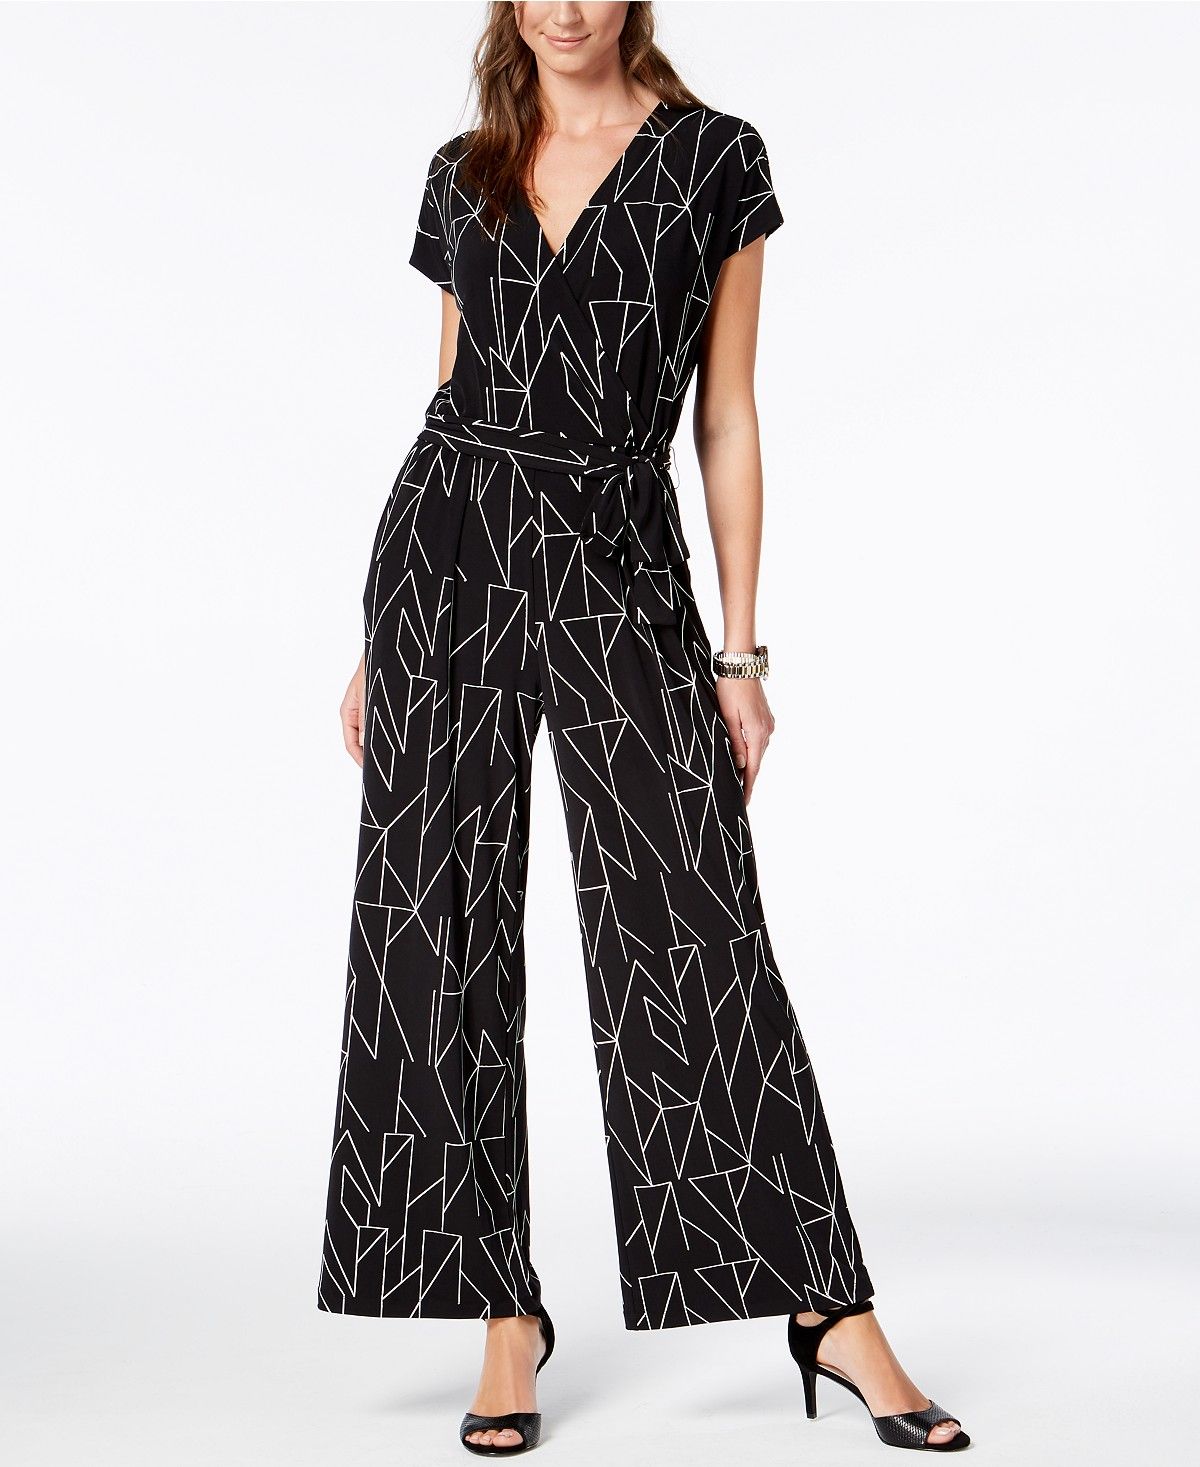 Wedding Guest Jumpsuits: 27 Stylish Picks - hitched.co.uk - hitched.co.uk